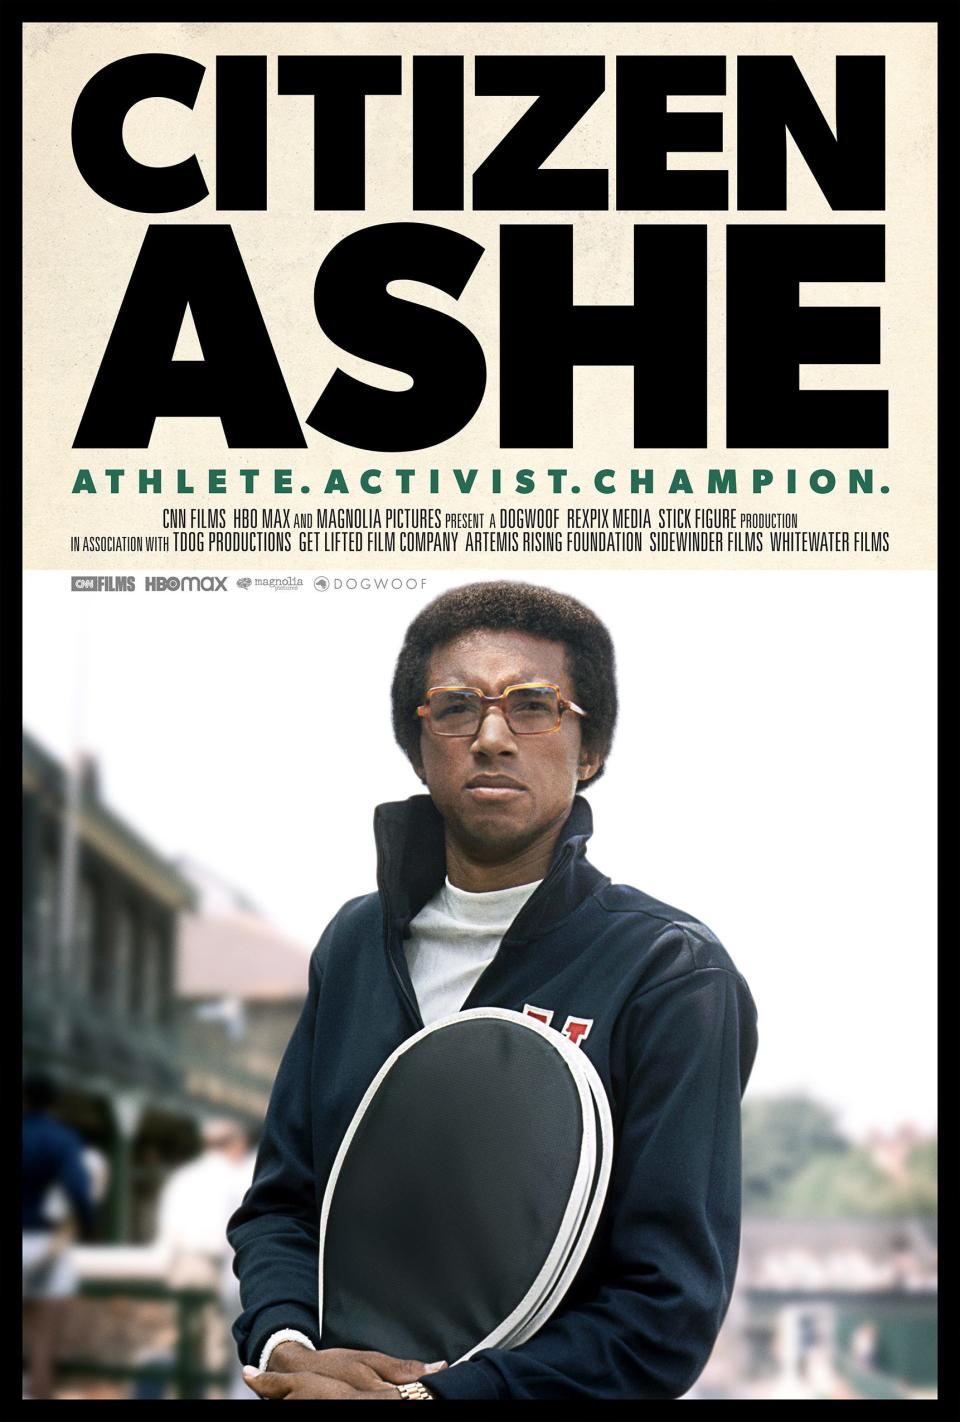 Arthur Ashe documentary "Citizen Ashe" will be shown on CNN and HBO Max in 2022.